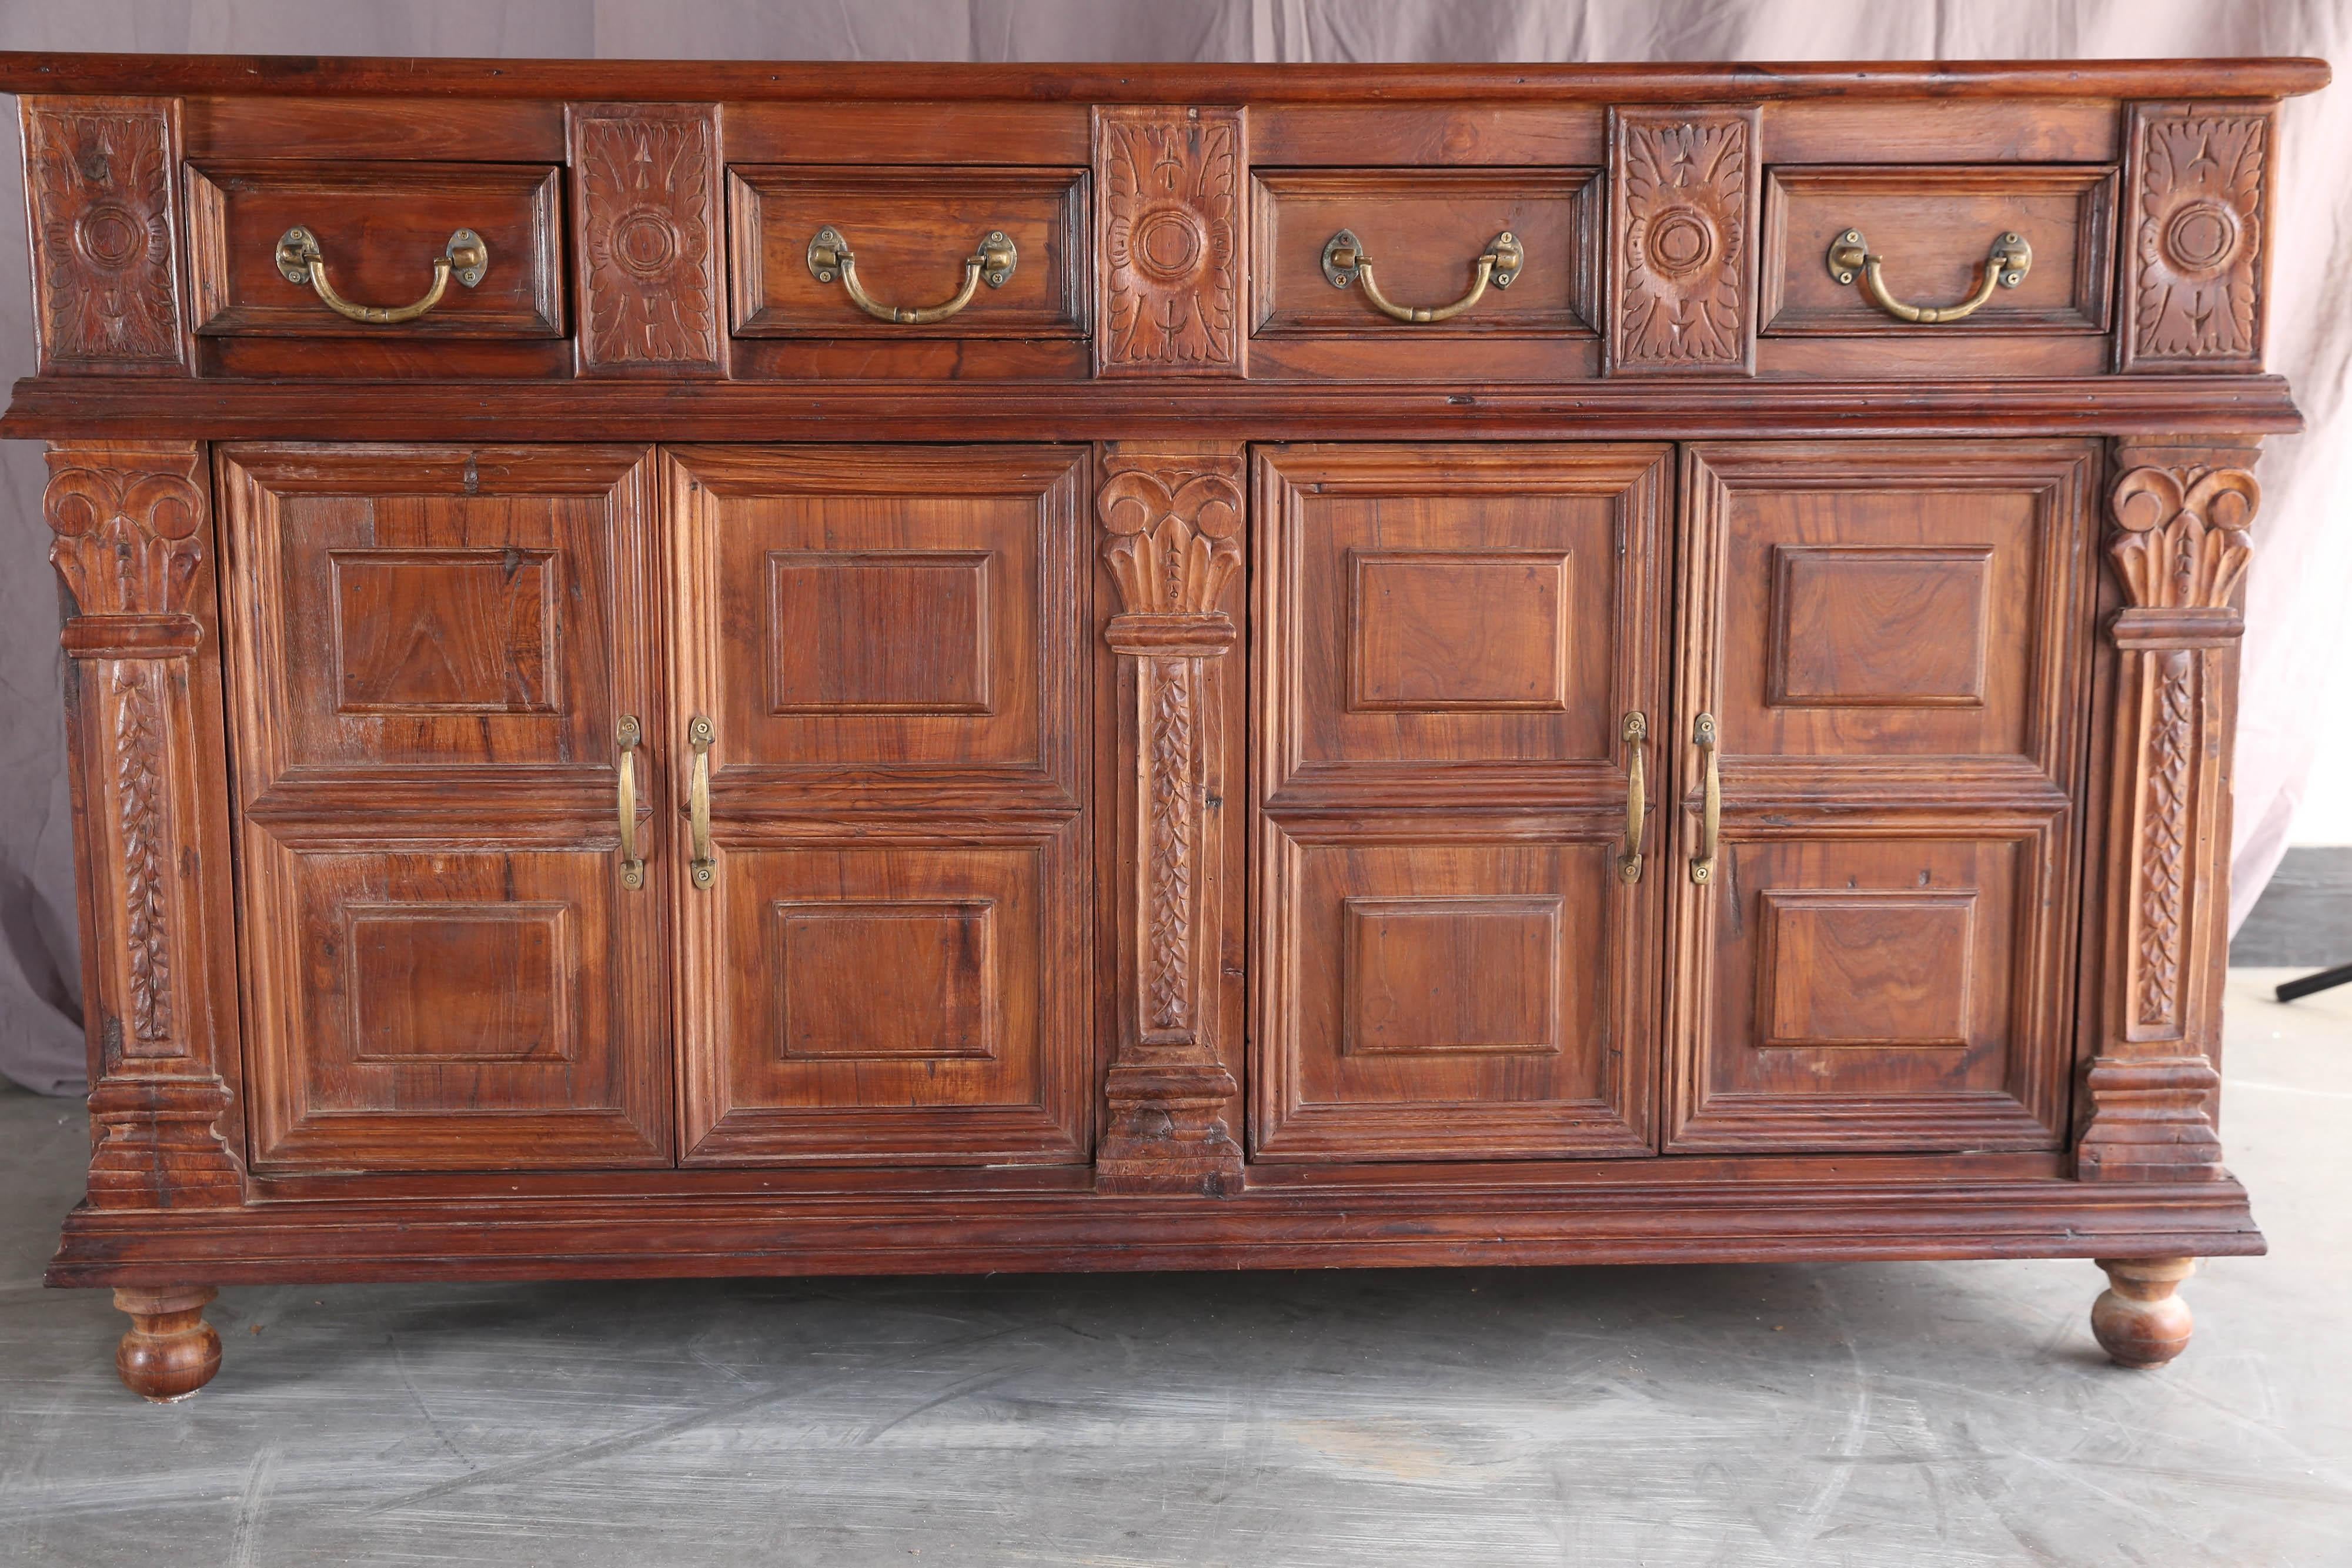 An unique custom-made solid teak wood credenza from a French Colonial home in Asia. It has four upper drawers and two large bottom shelves. It is mounted on ball feet. It retains original hand cast brass hardware. It comes from a town Pondicherry in